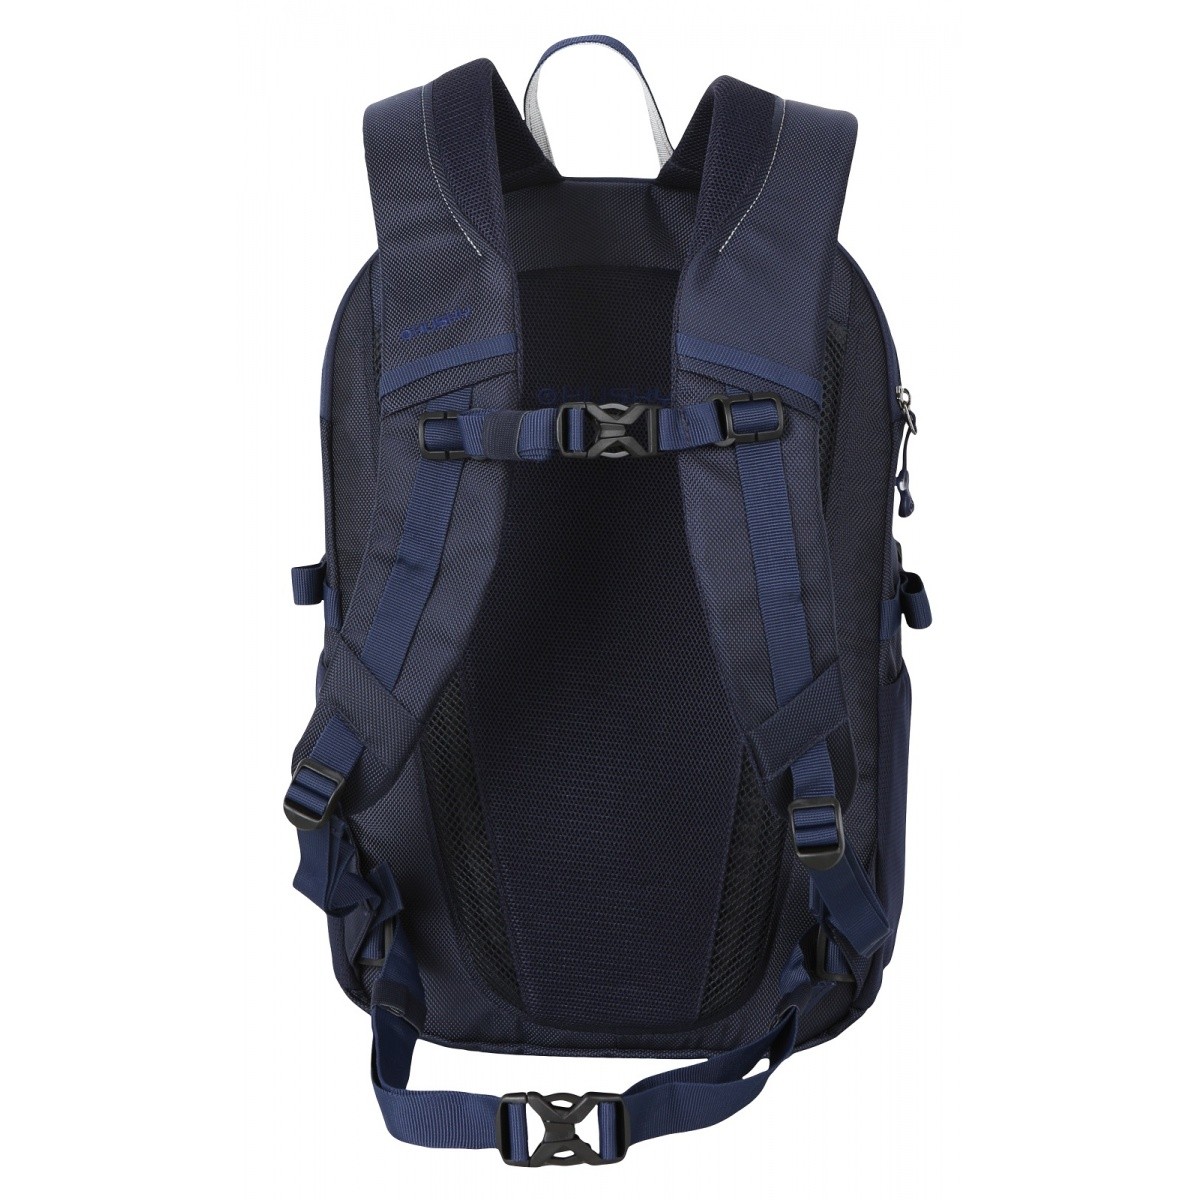 Backpack Nory 22 HUSKY - view 5